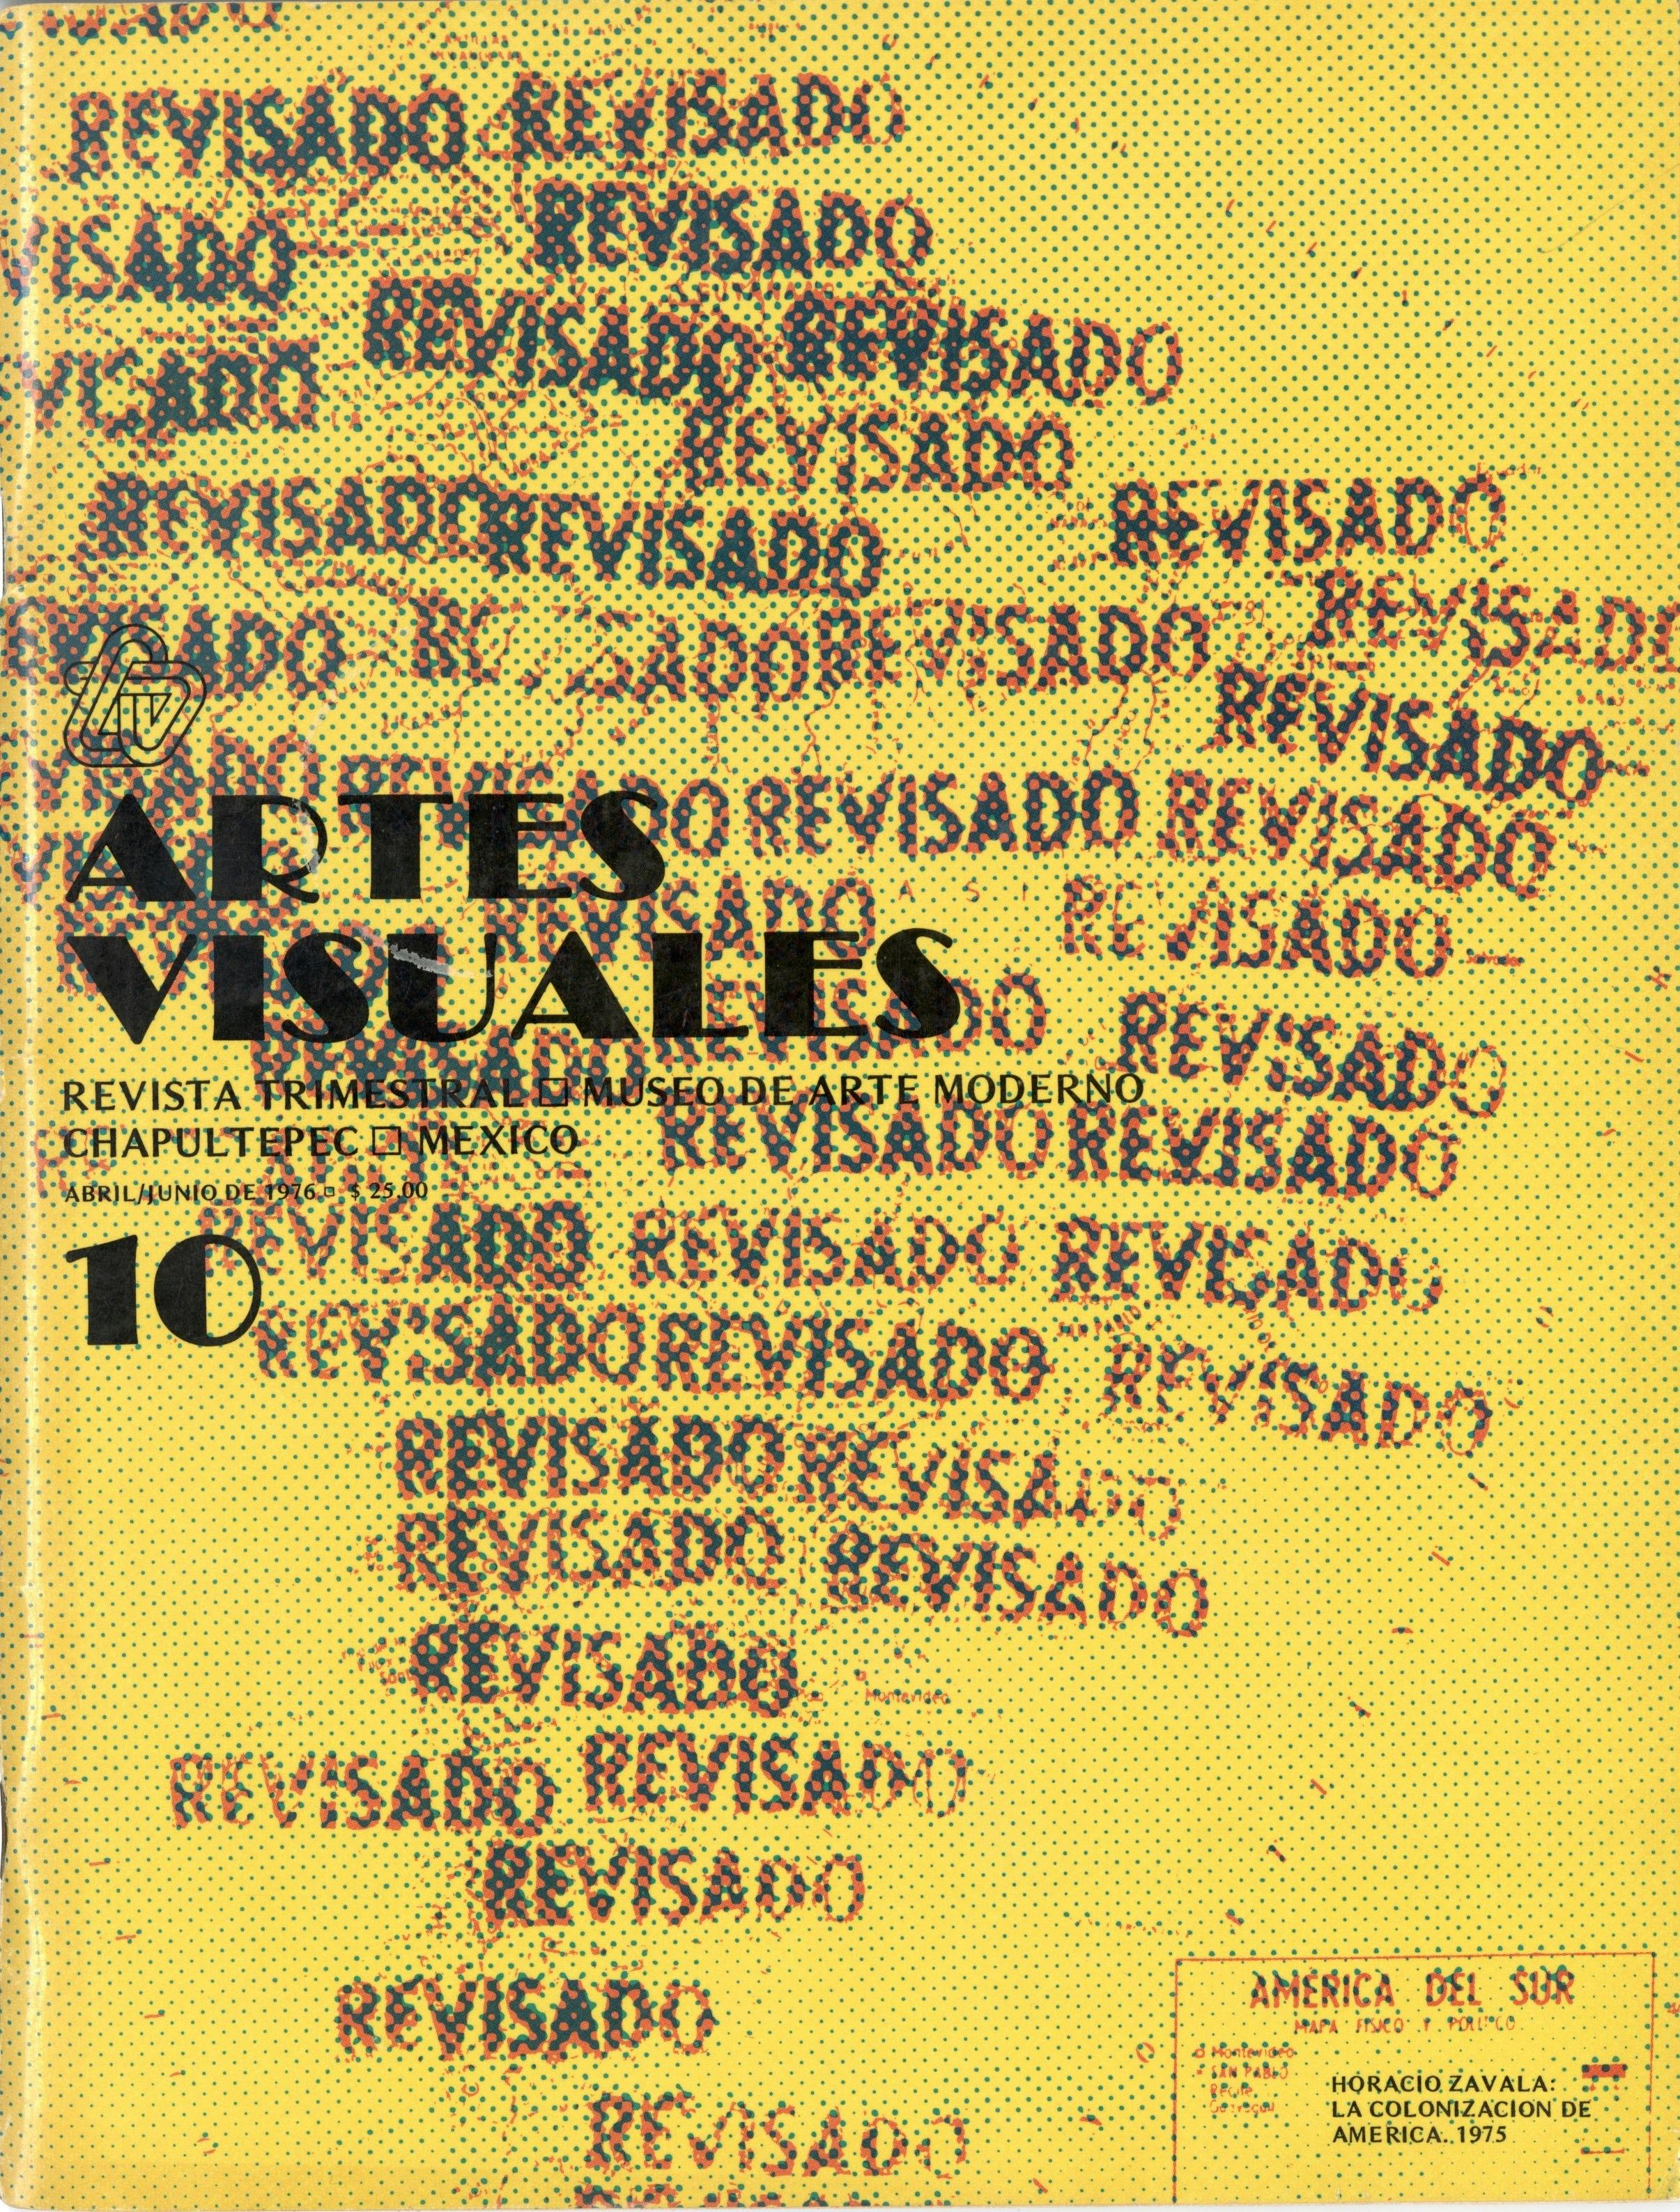 Magazine cover with map of South America over yellow background